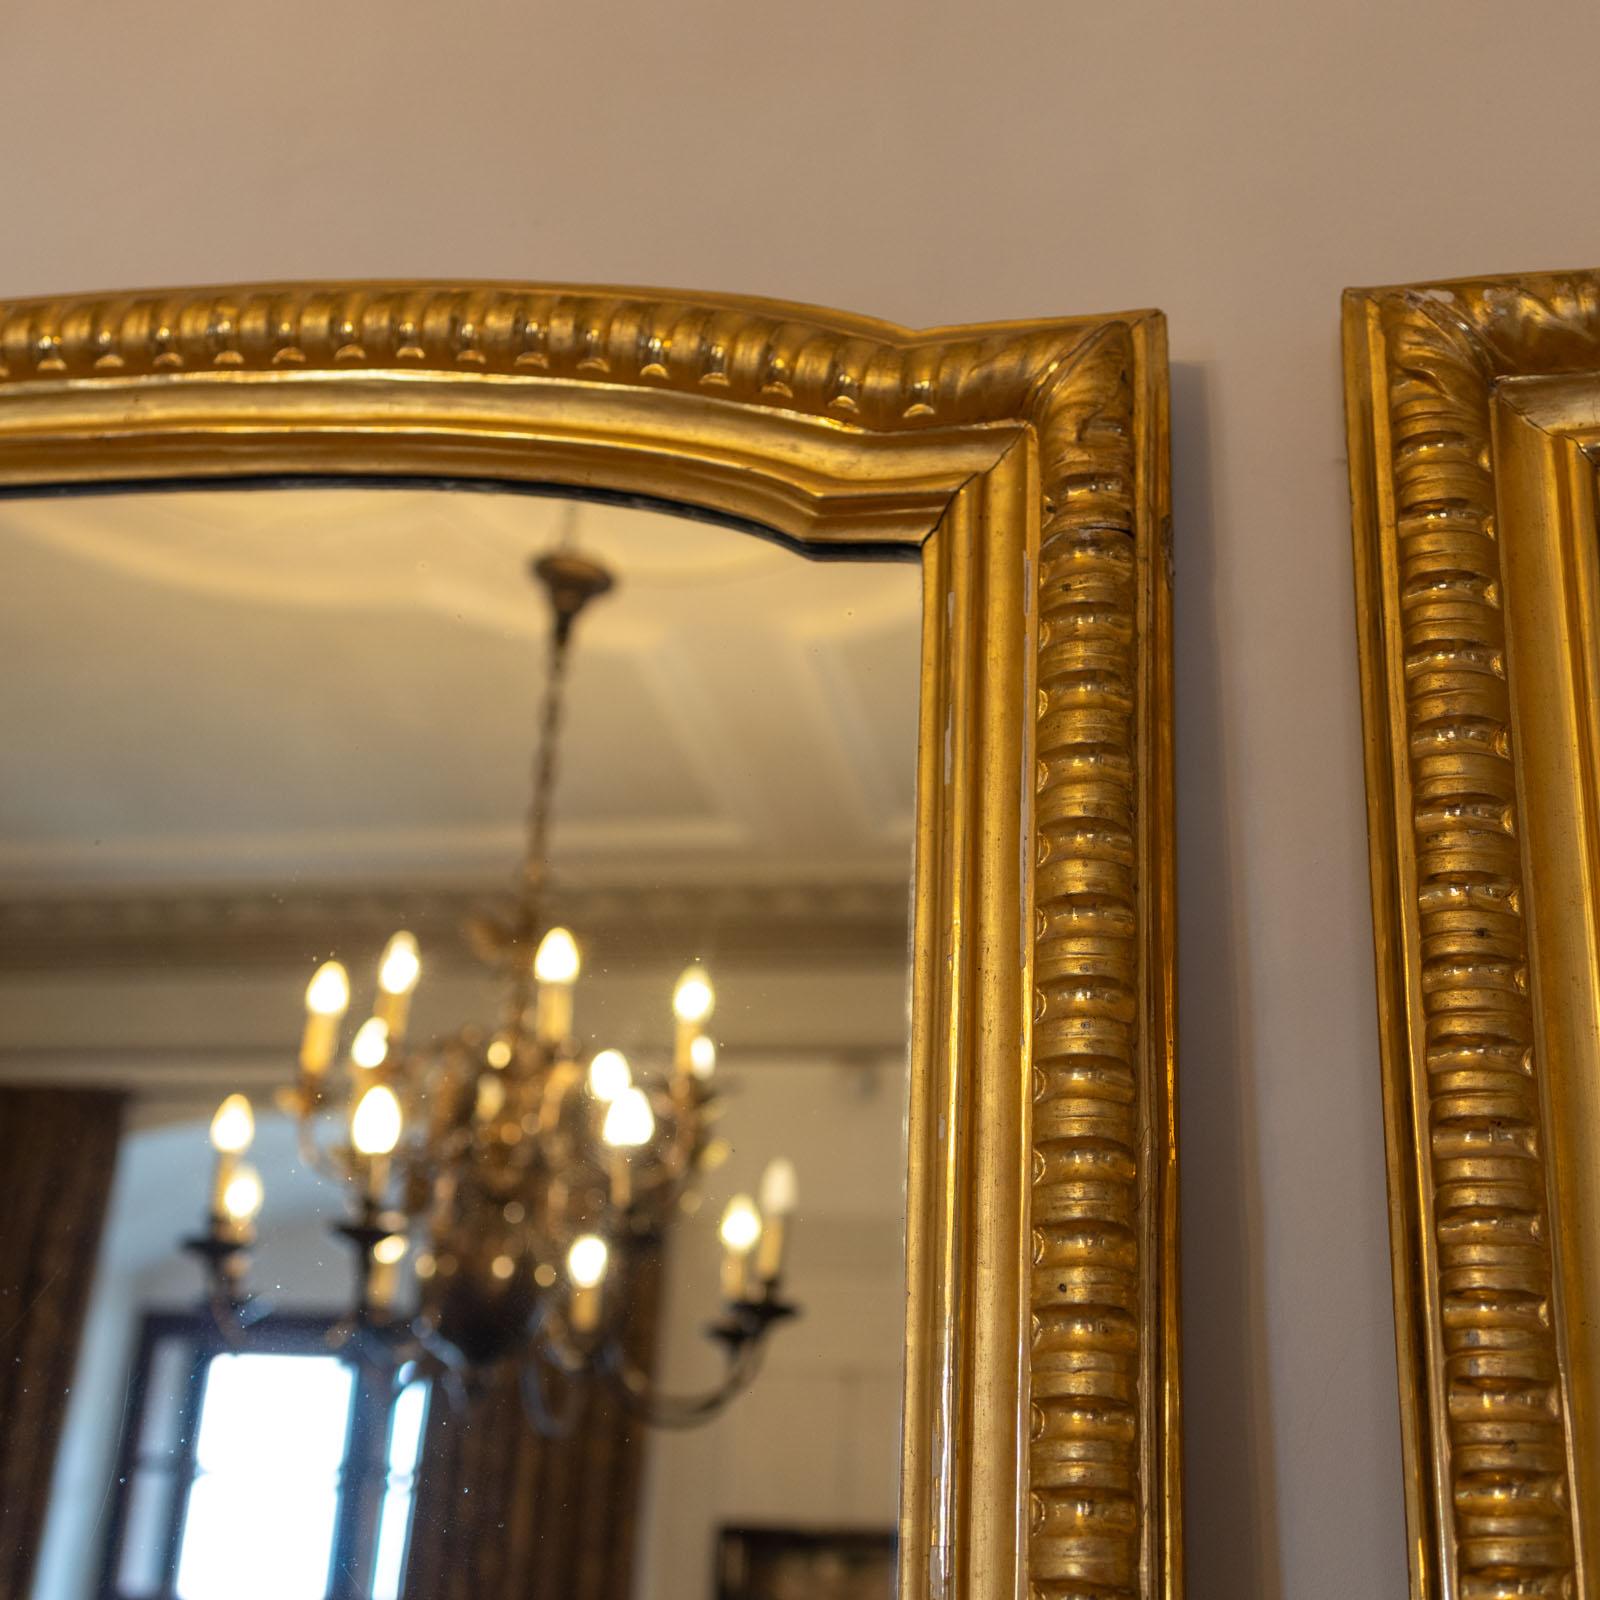 Italian Large Mirrors in a gold-patinated frame, Italy Mid-19th century